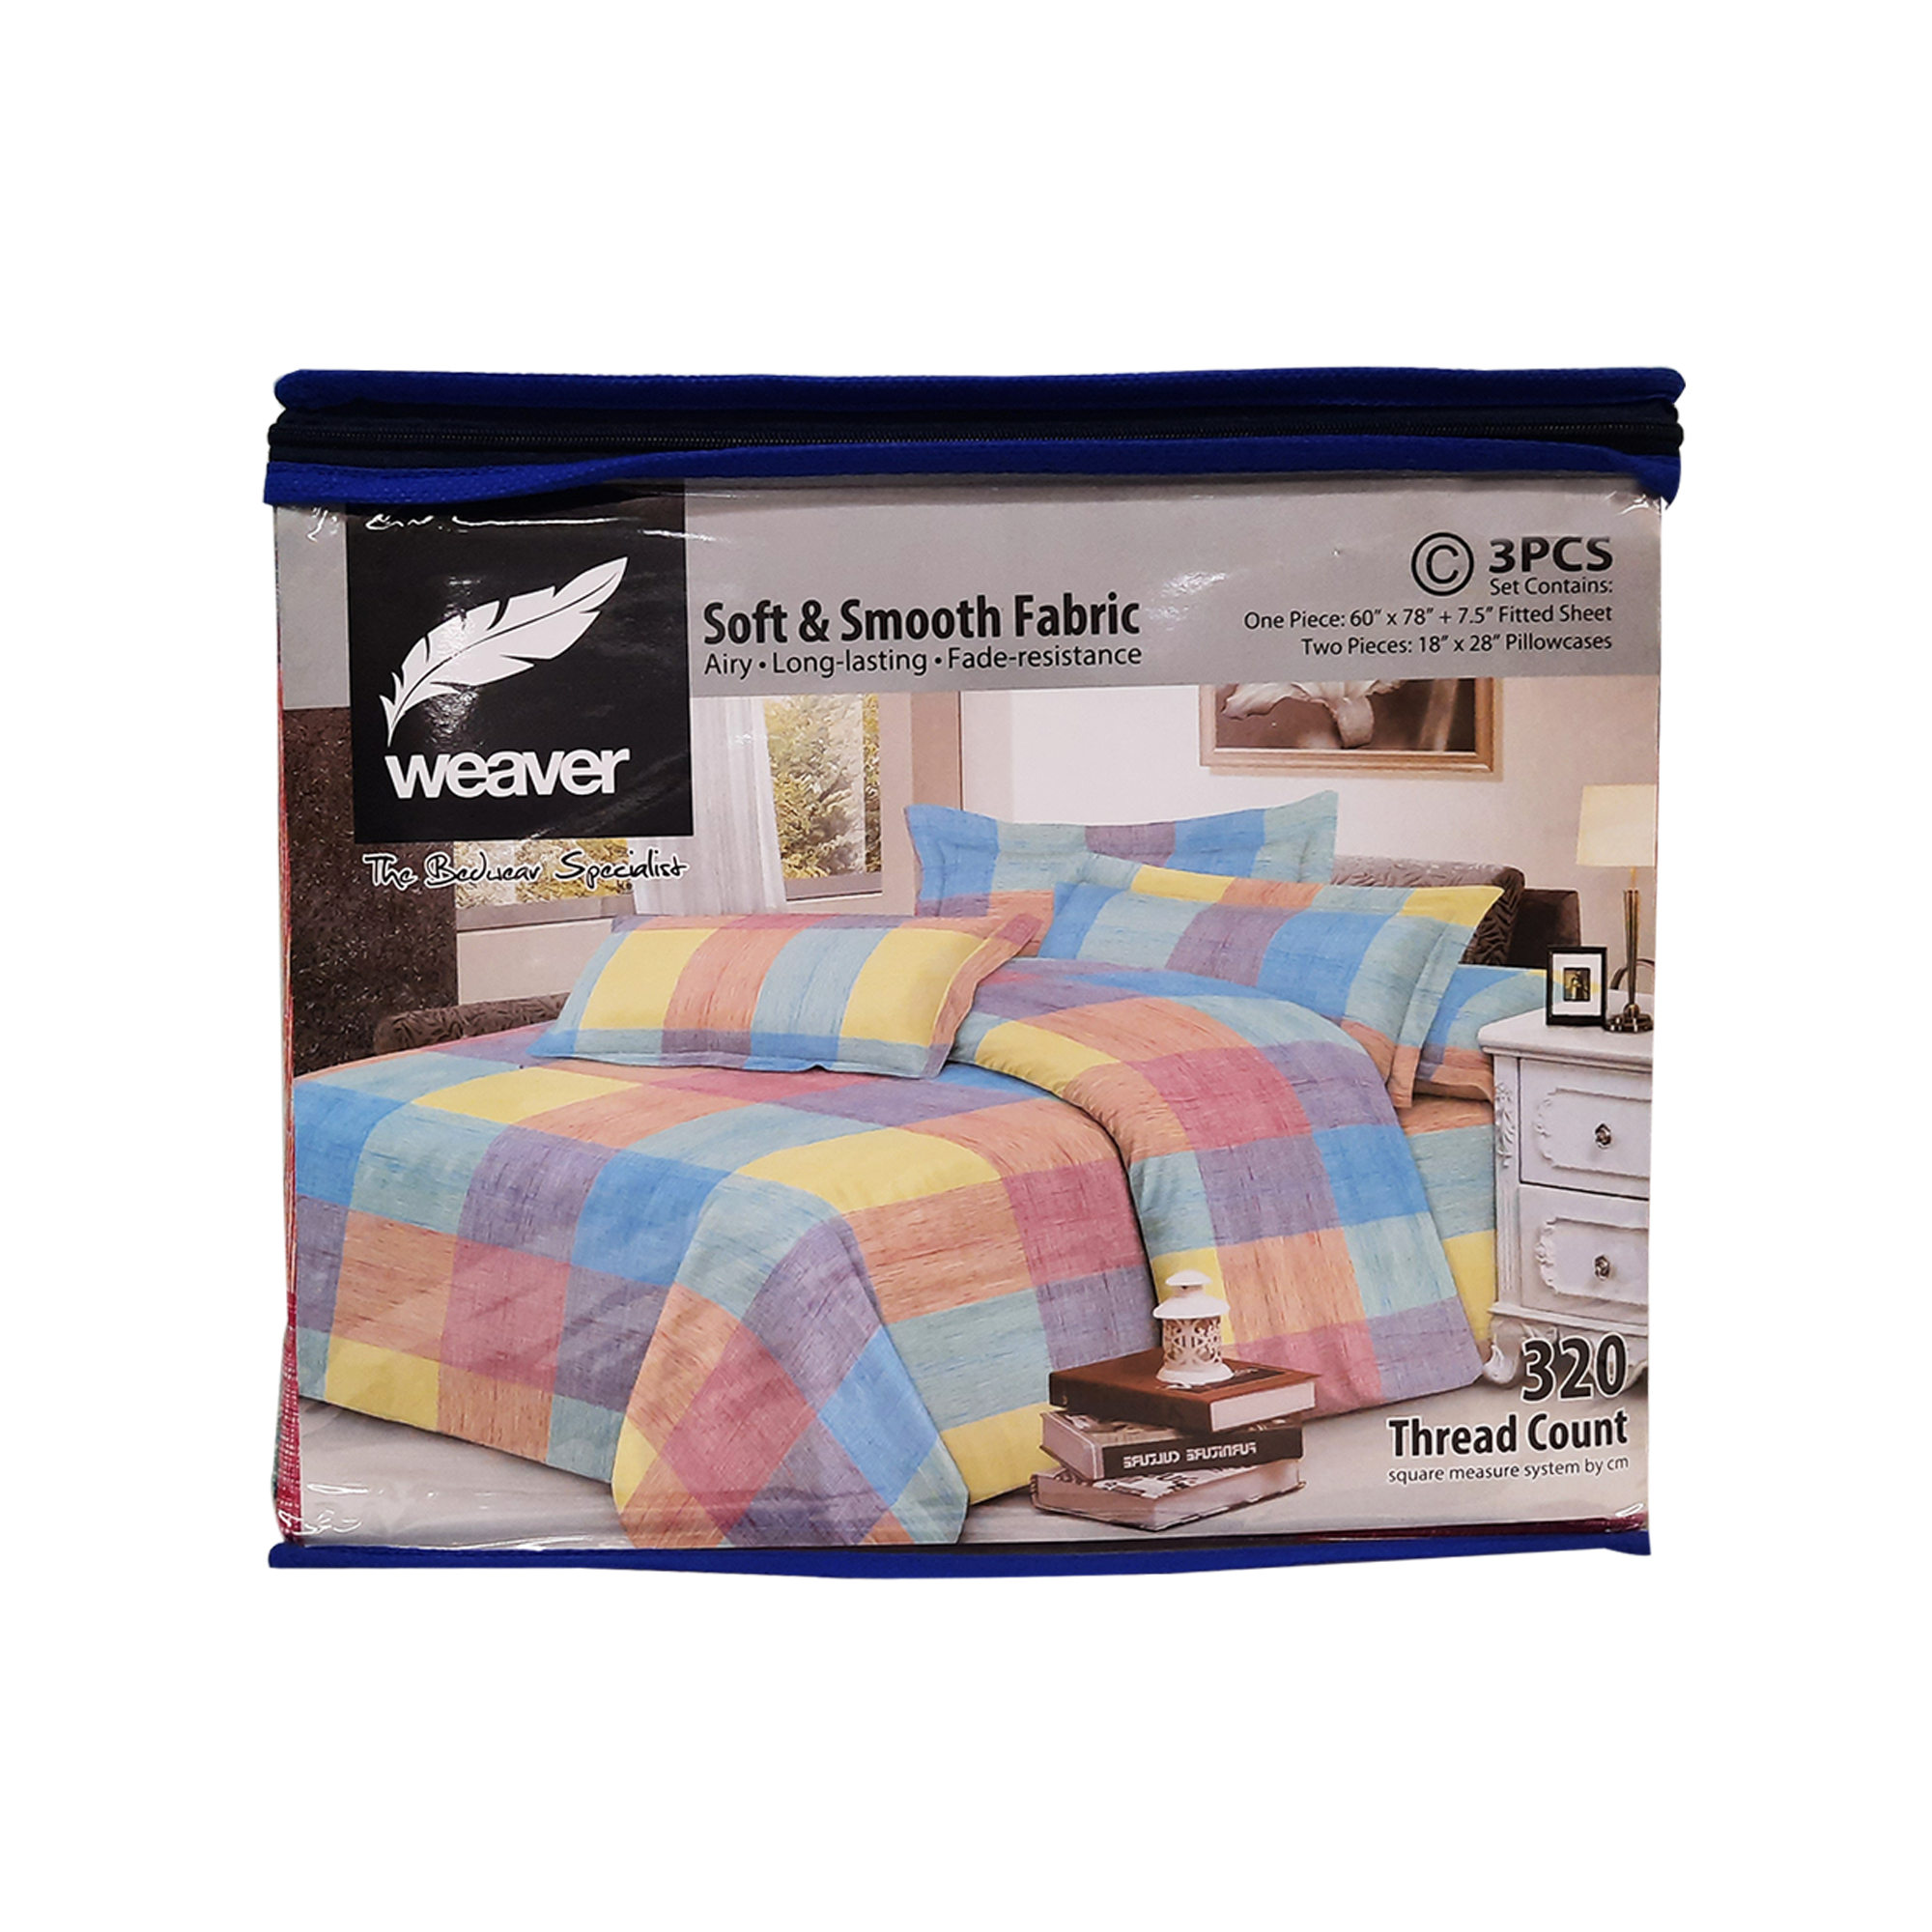 Weaver Soft & Smooth Fabric 3pc Bed Sheets Set - Queen